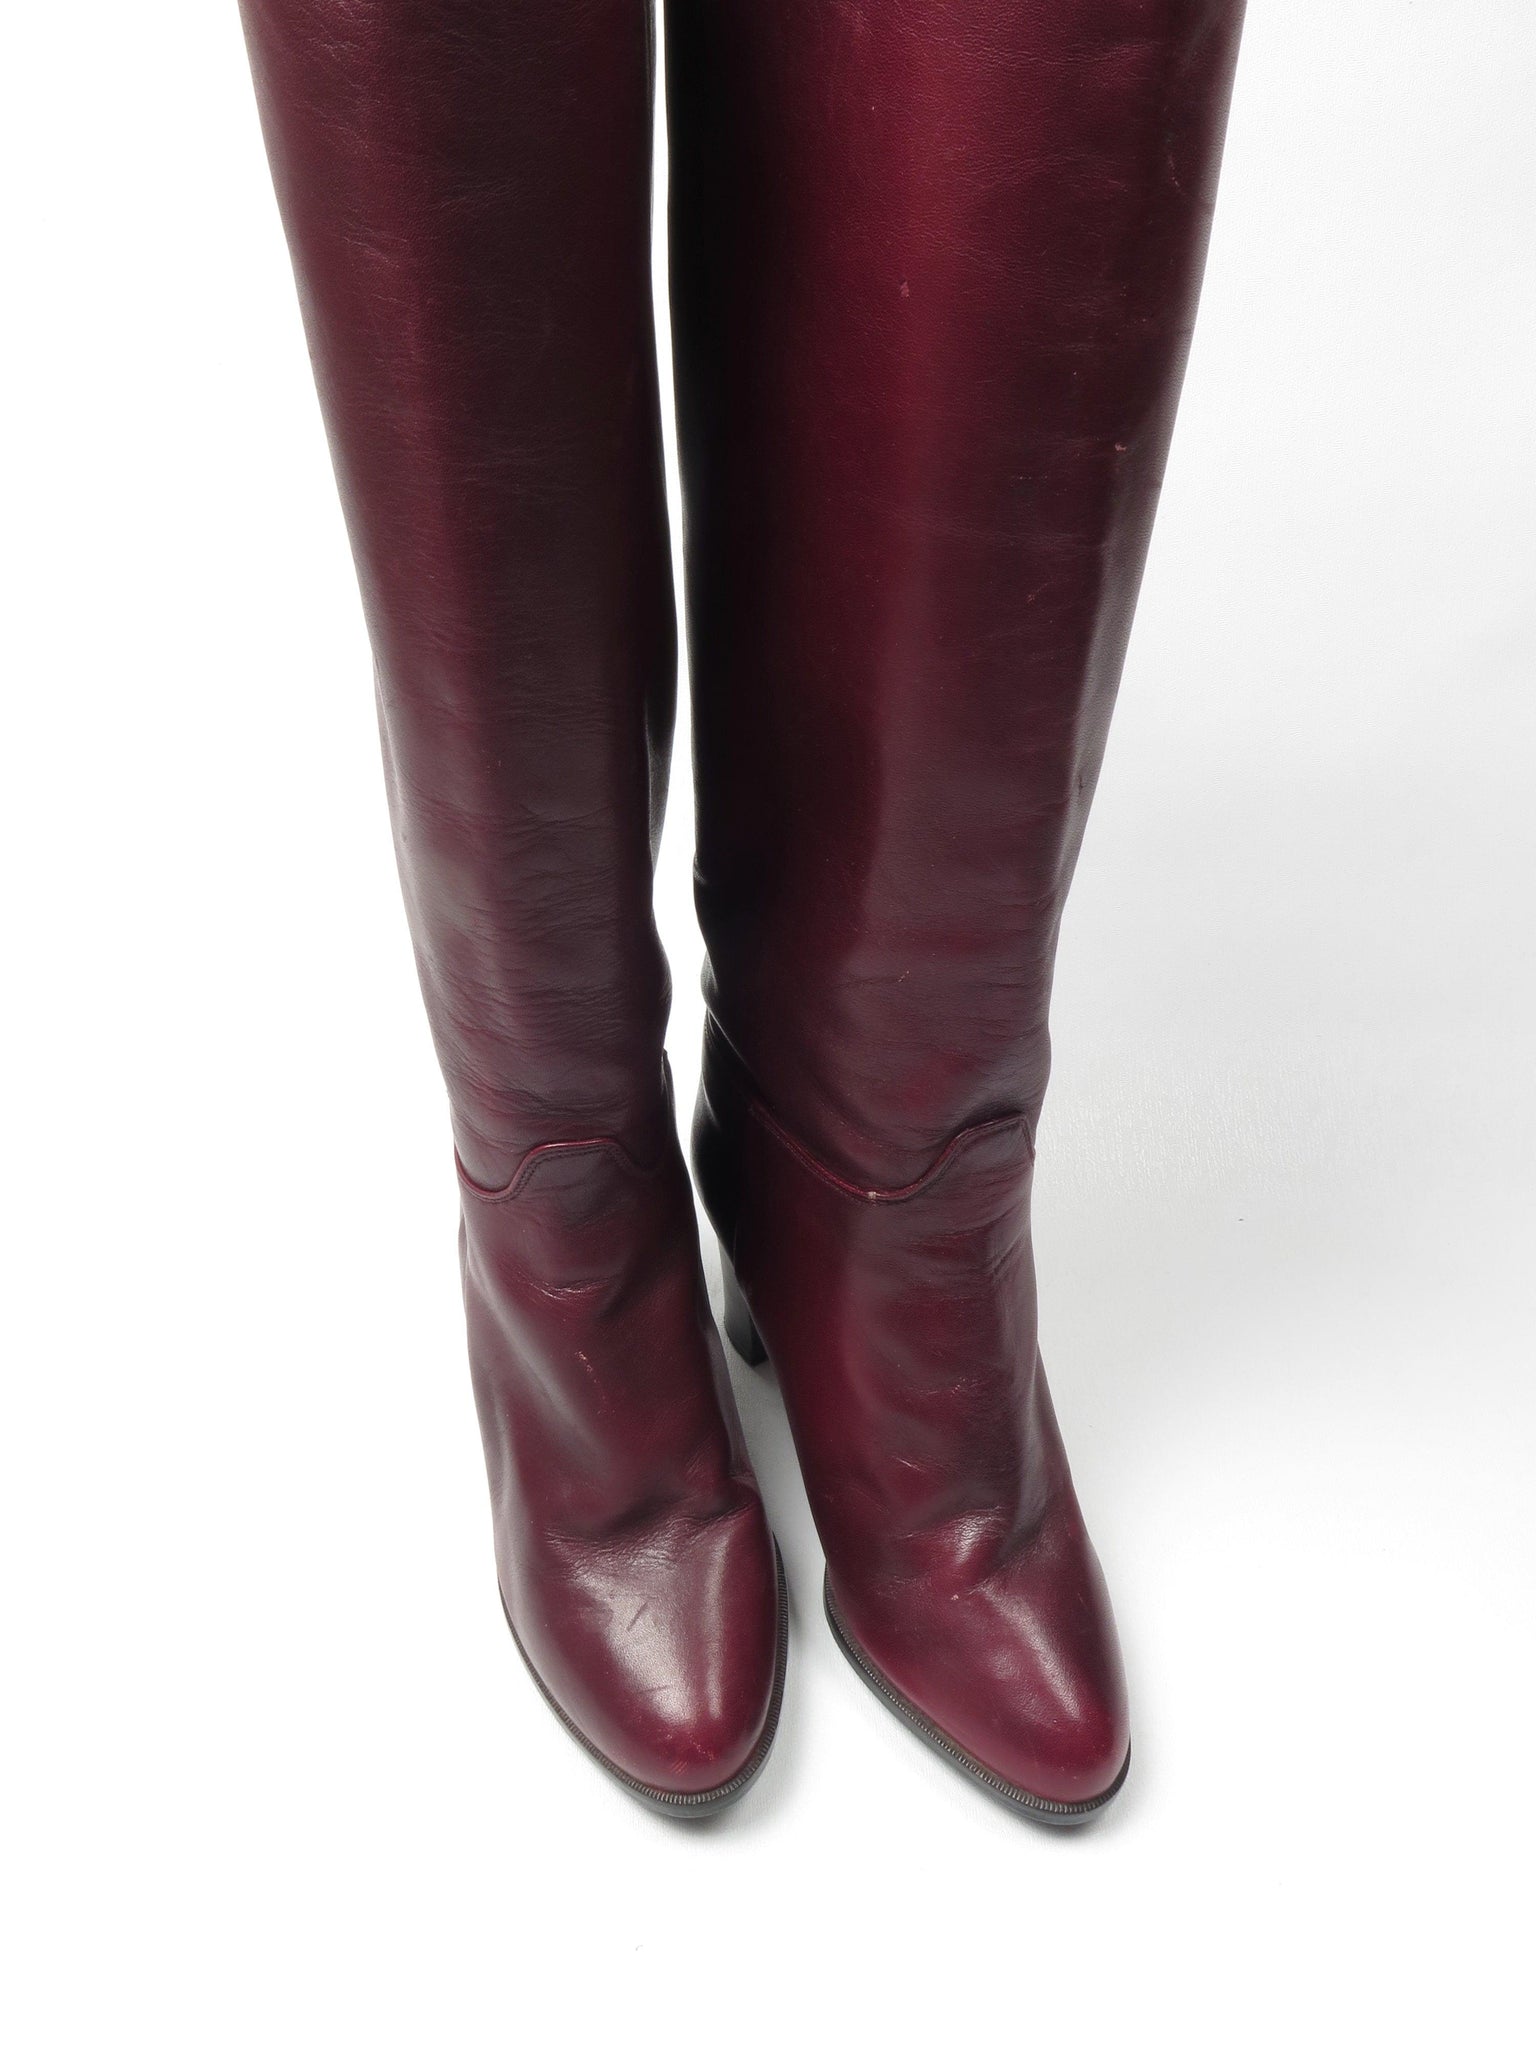 Wine Leather Vintage Boots 36/3 - The Harlequin